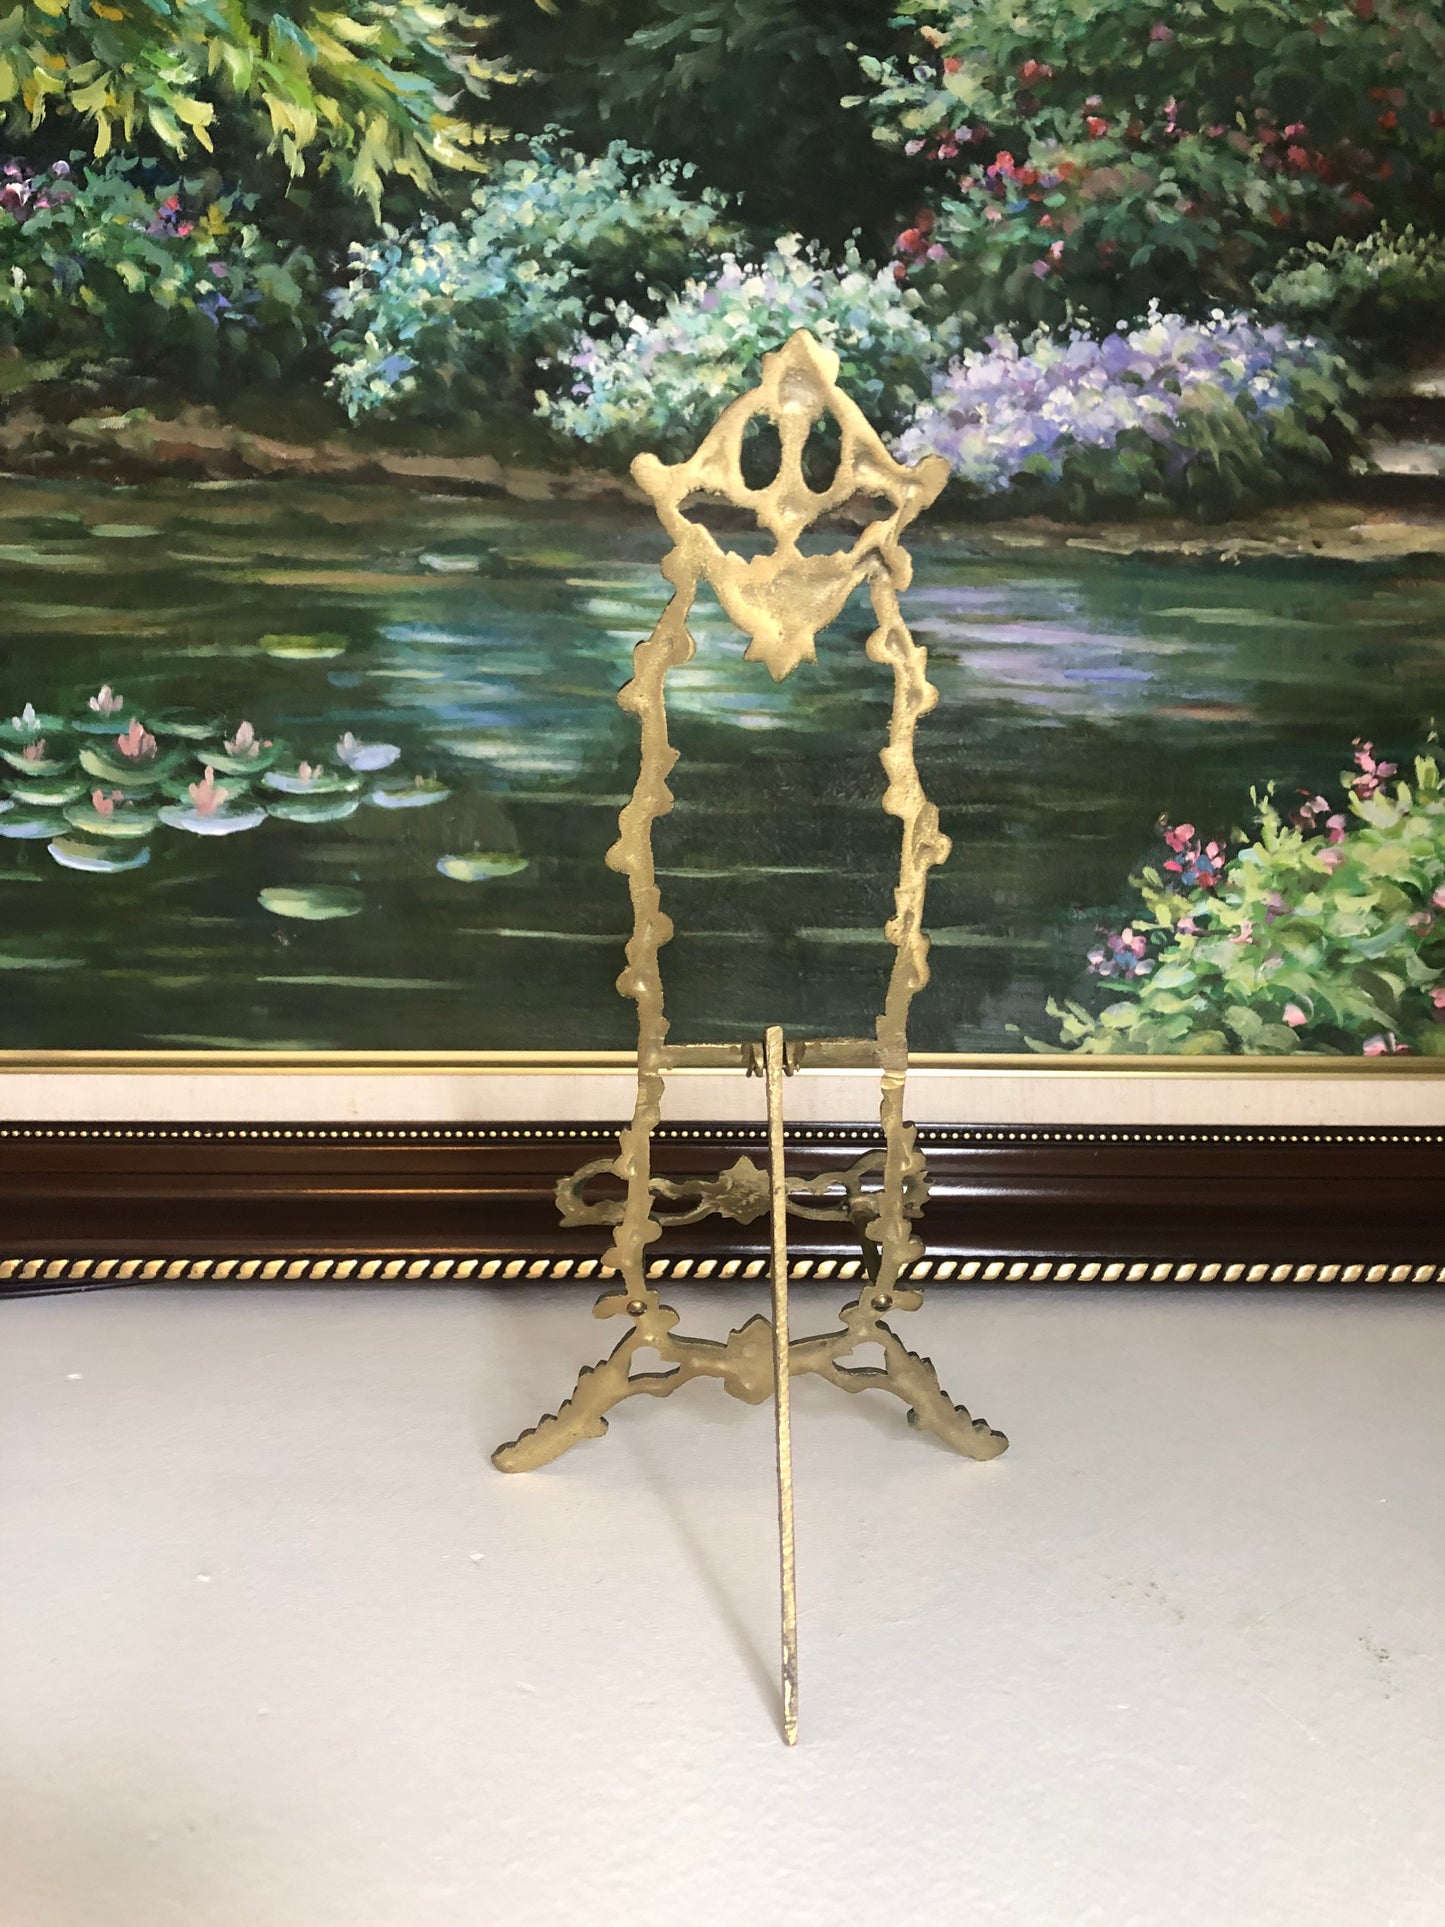 Original signed French art with ornate brass easel - Excellent condition!